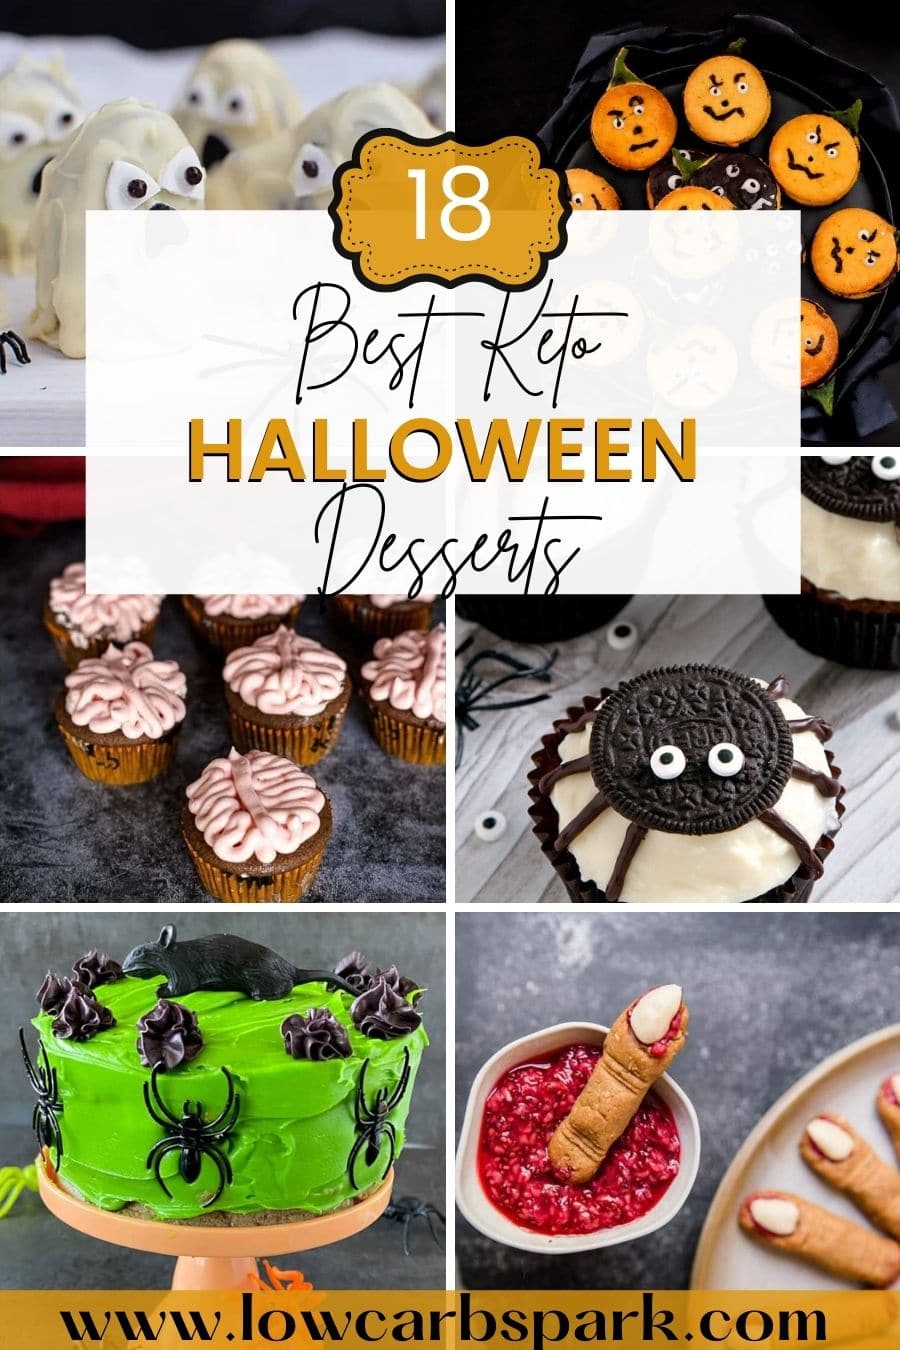 Do you want to make some fun and spooky keto Halloween desserts to celebrate this year? These 18 keto Halloween desserts are the best if you're looking for spectacular and spooky sugar free treats.